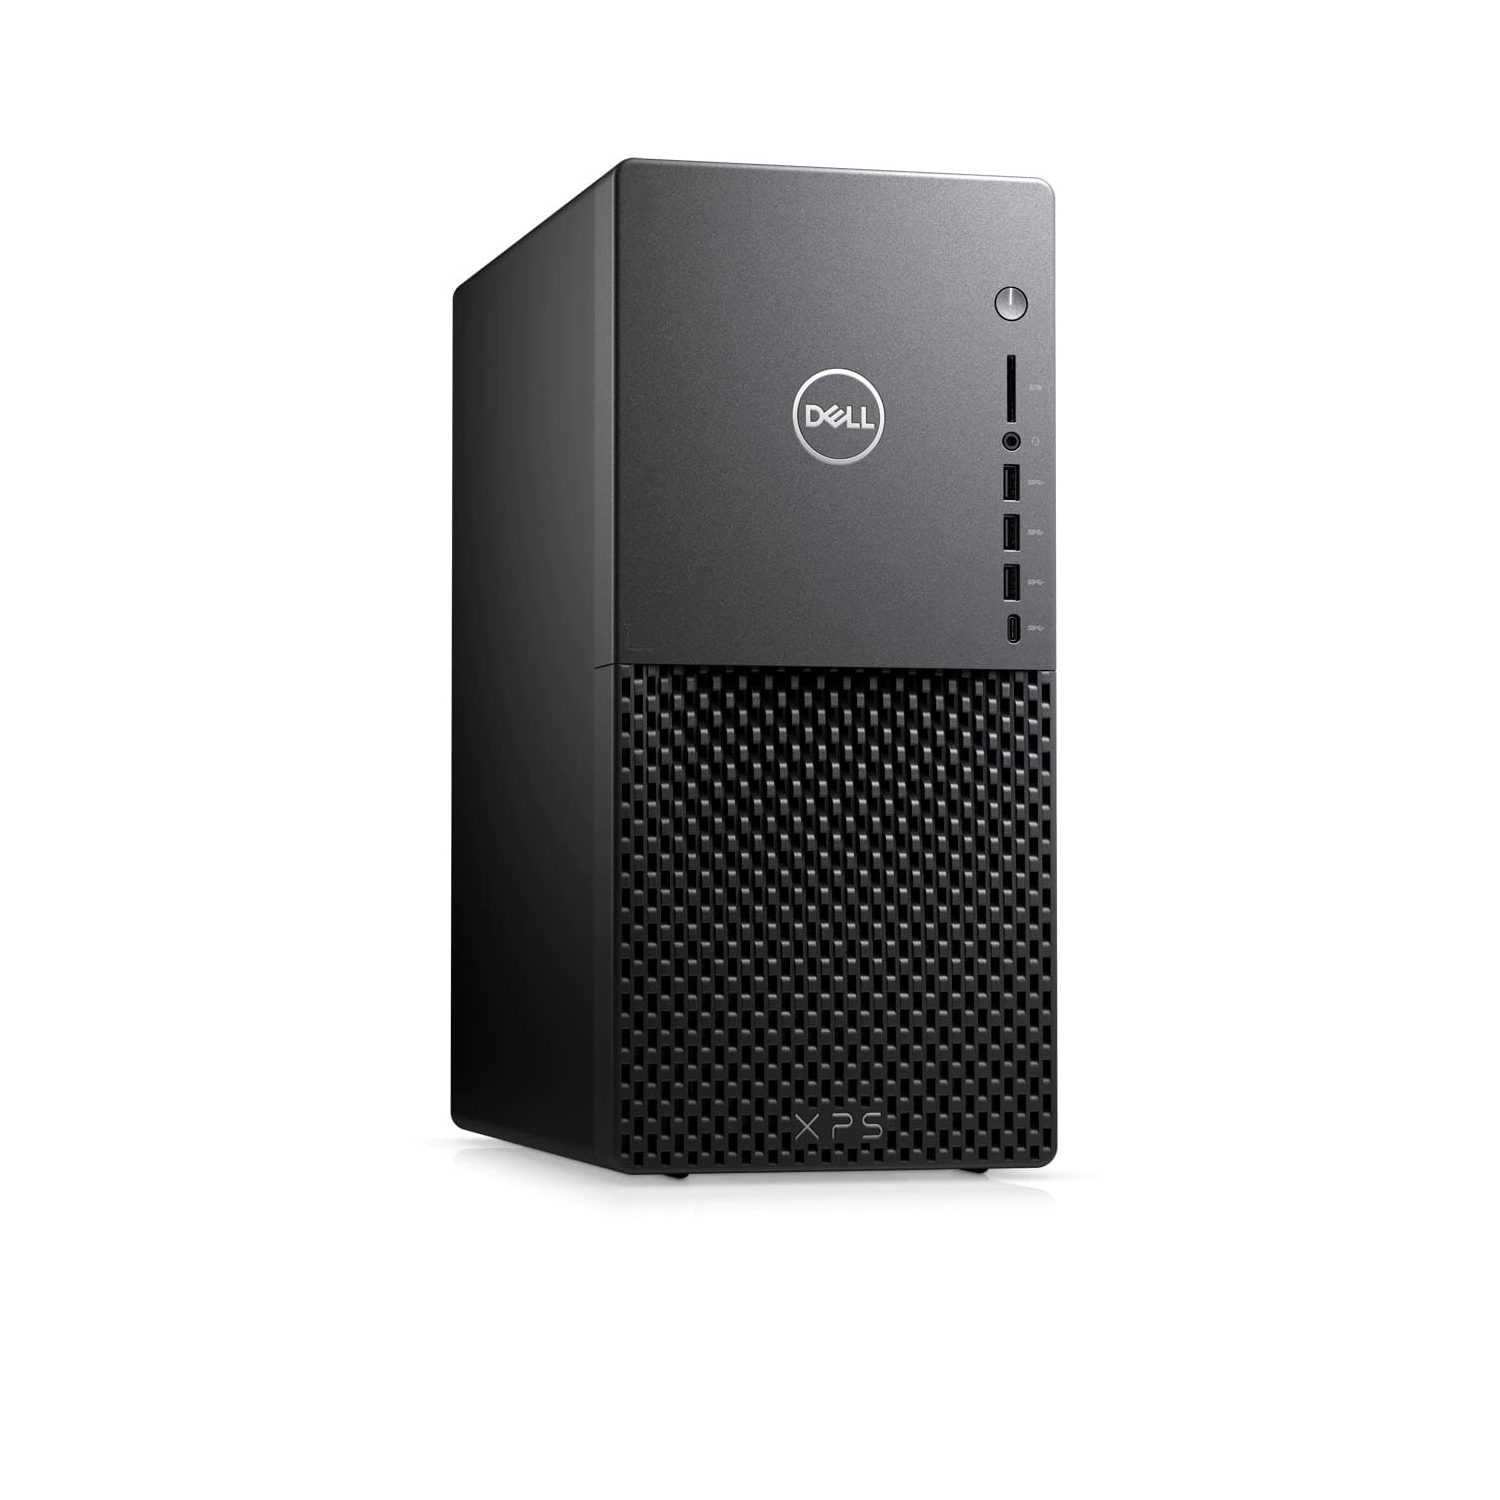 Refurbished (Excellent) - Dell XPS 8940 Desktop (2020) | Core i5 - 1TB SSD - 16GB RAM | 6 Cores @ 4.9 GHz - 11th Gen CPU Certified Refurbished